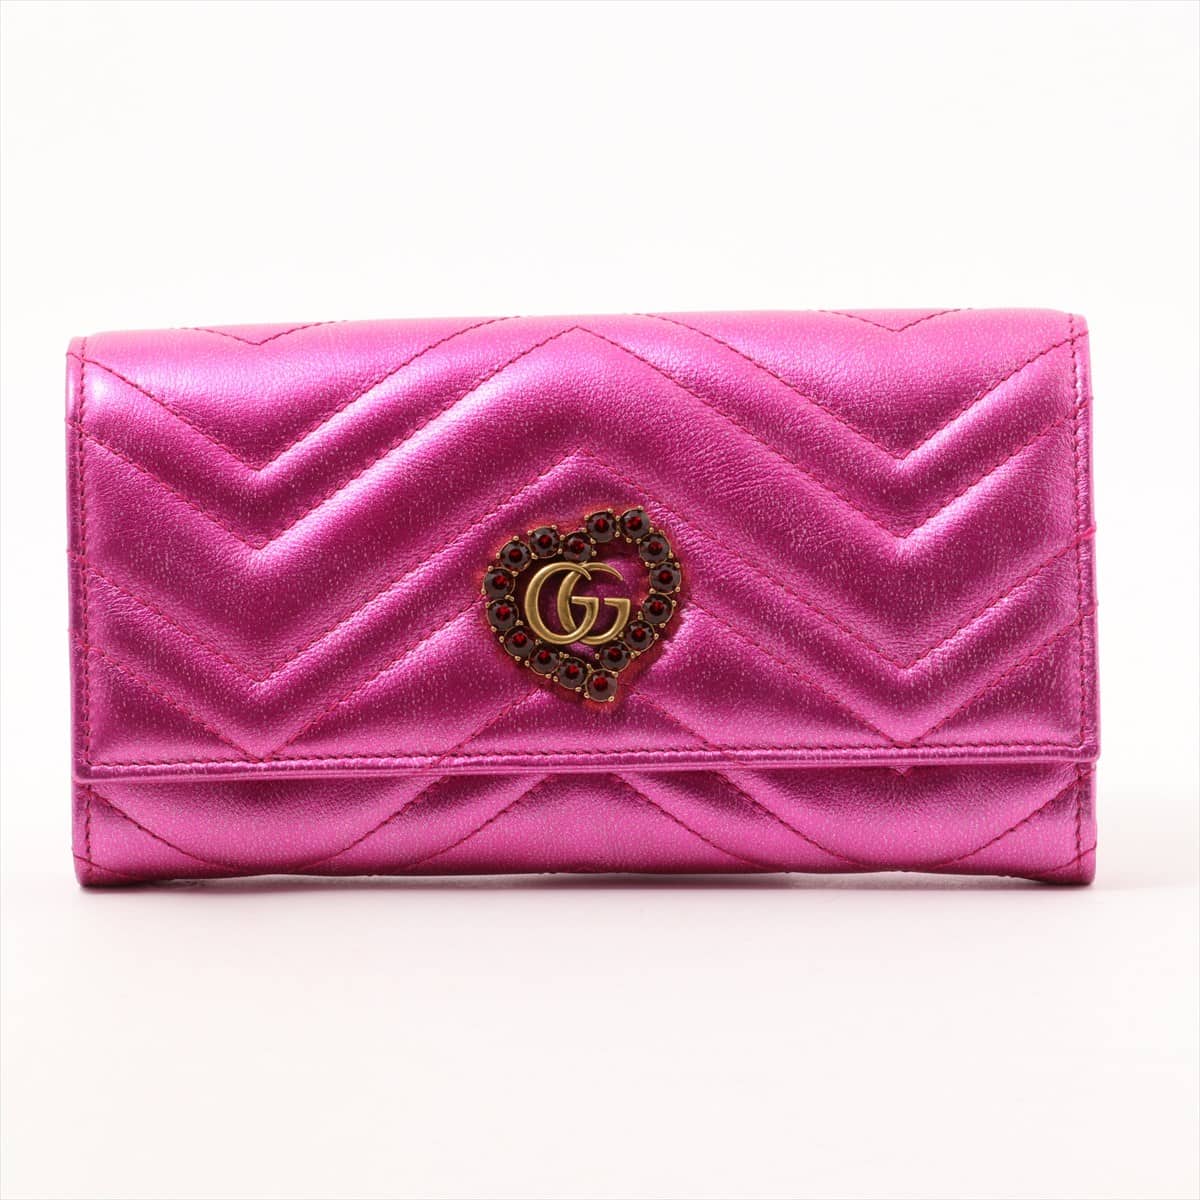 Gucci GG Marmont hearts 549882 Leather Wallet Pink